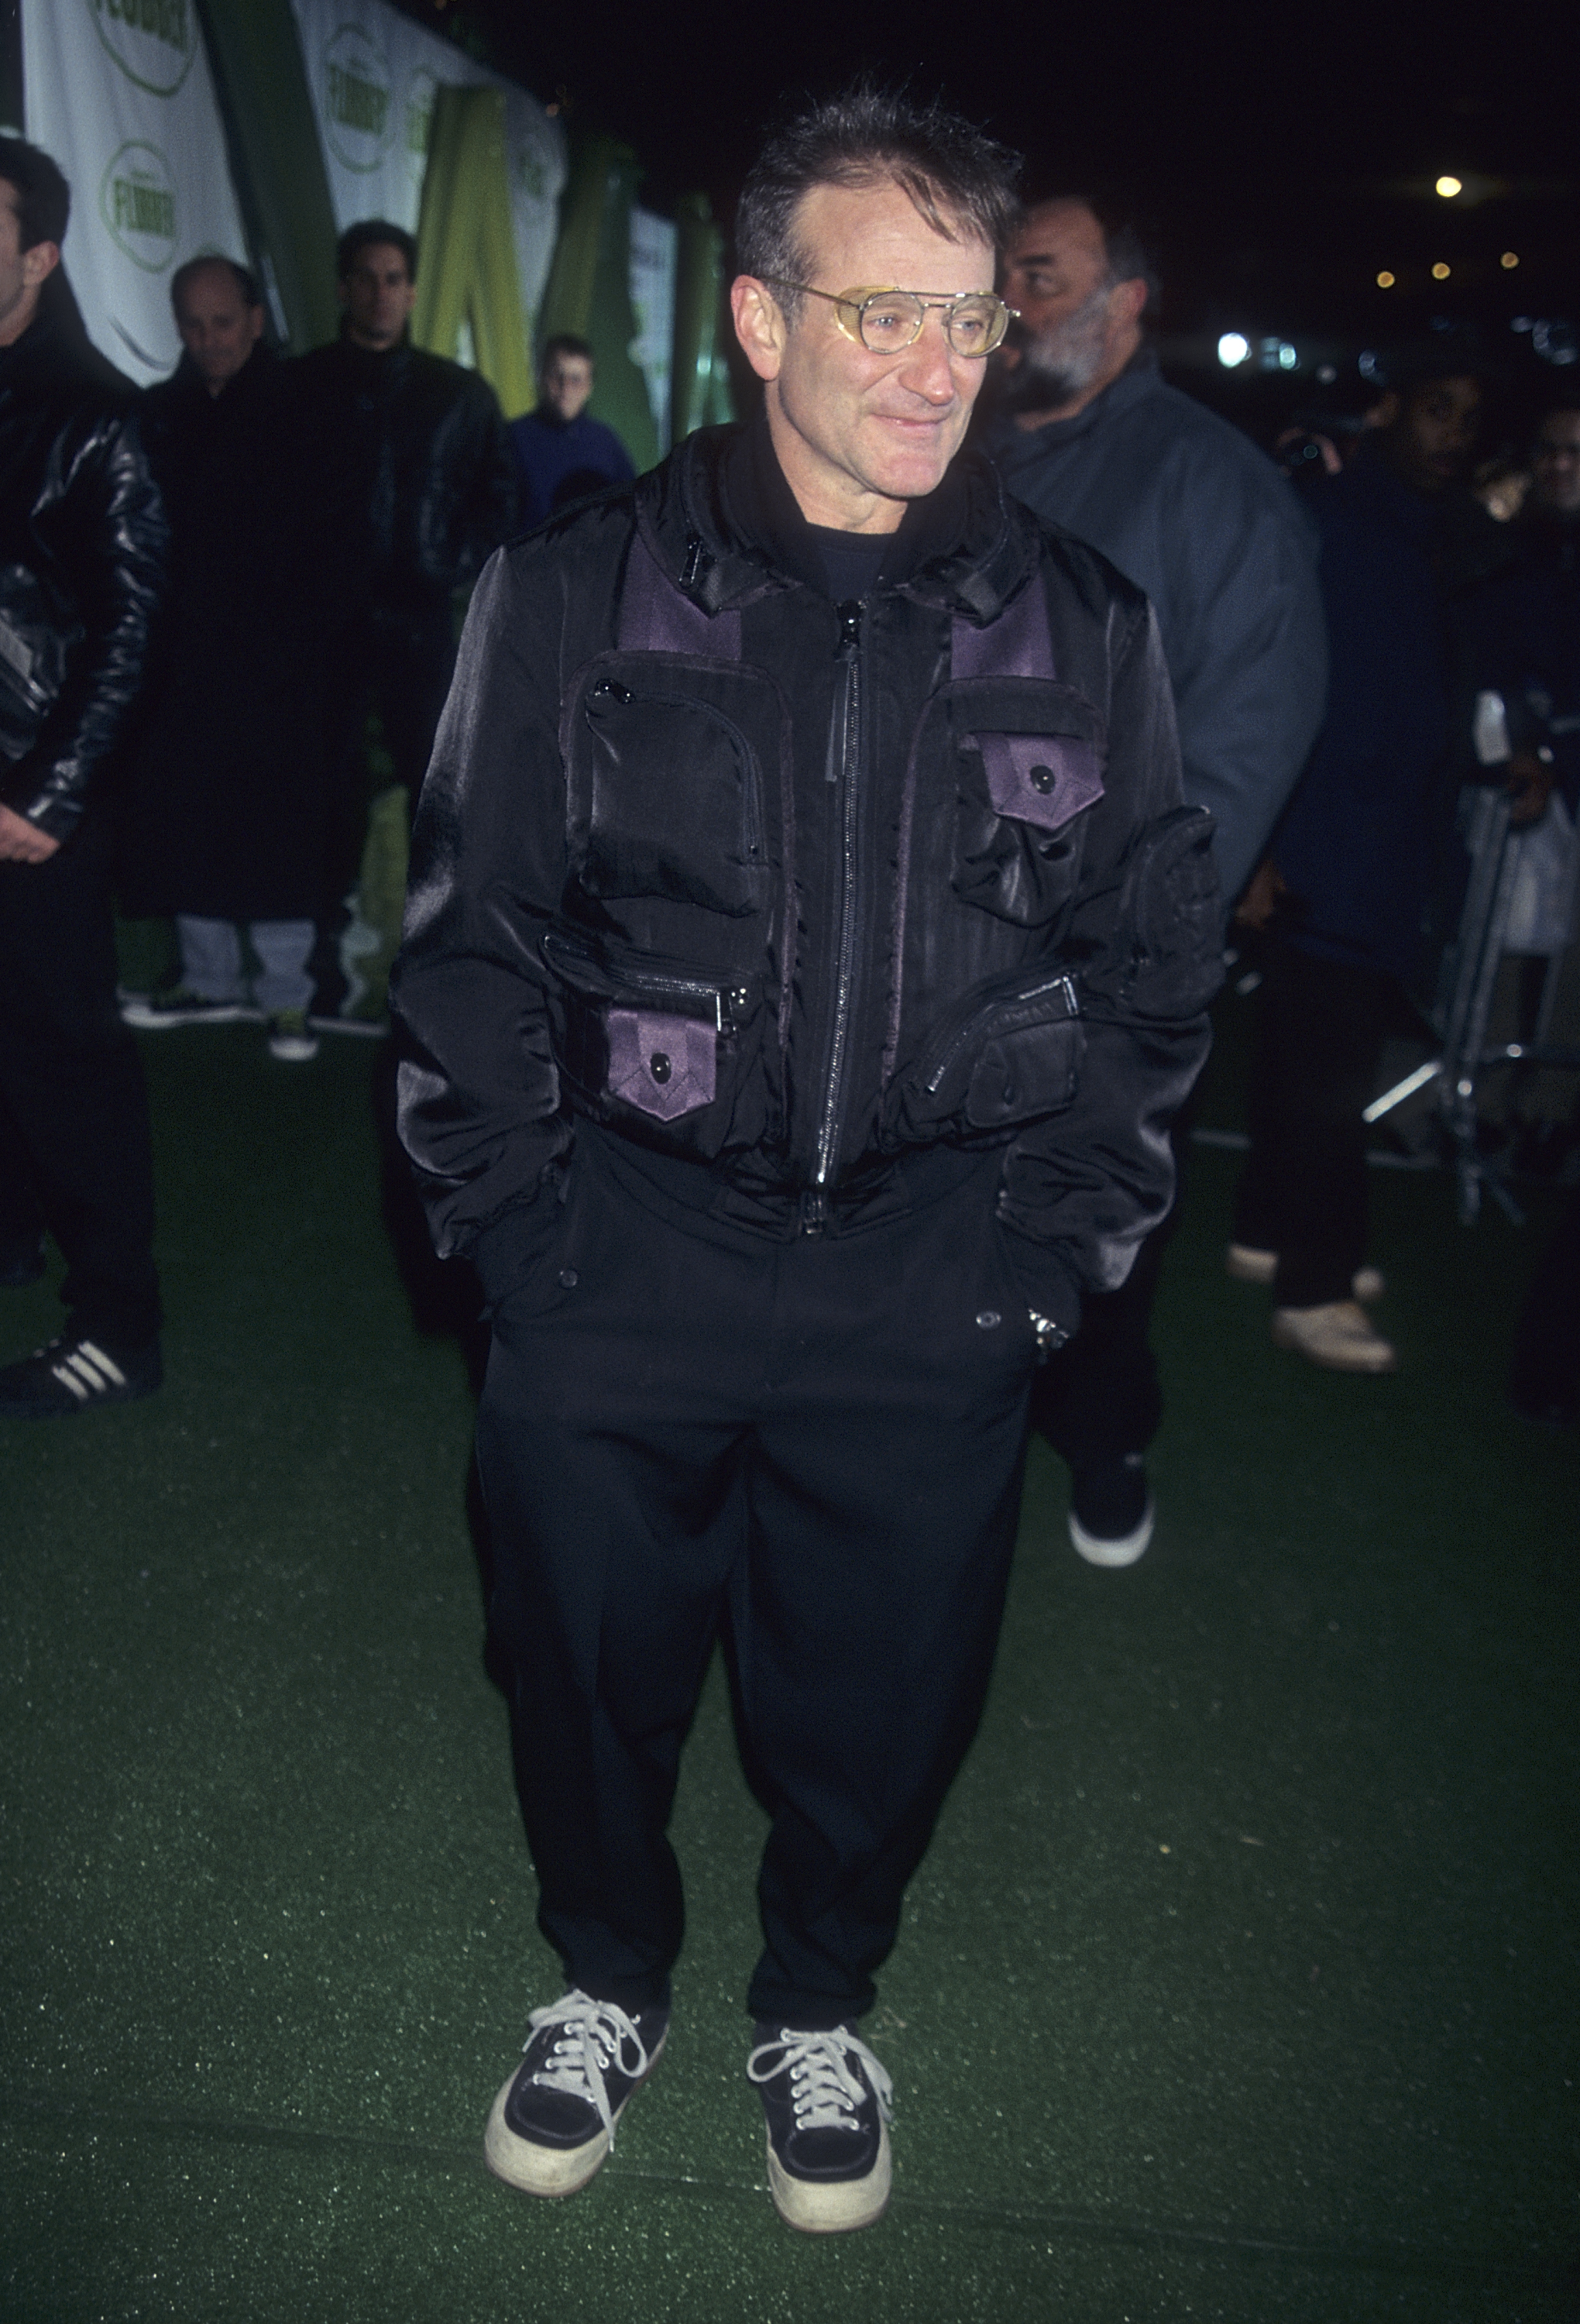 Robin Williams wearing Issey Miyake at the Flubber premiere in 1997